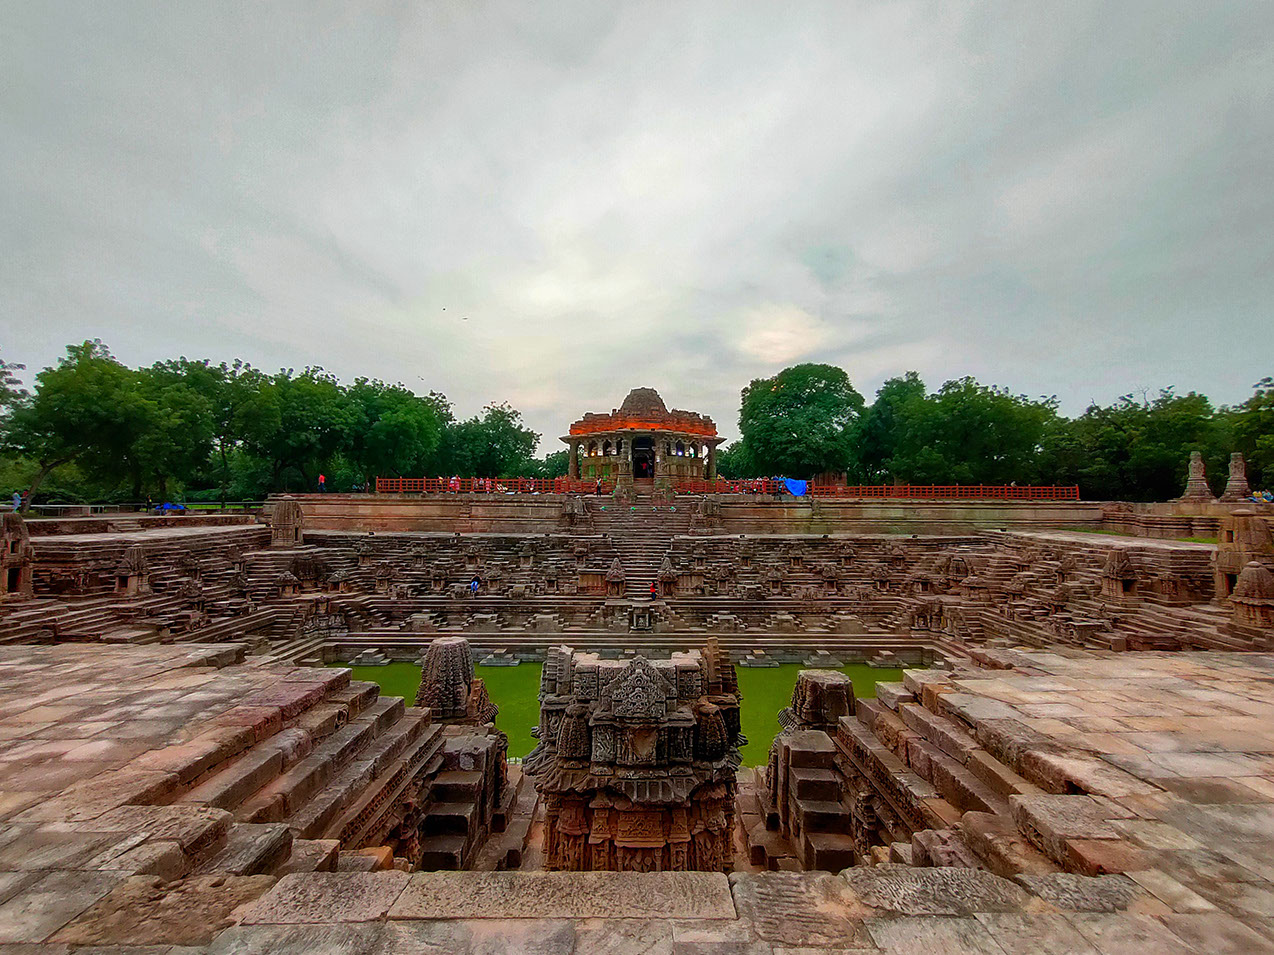 The stunning panorama of an ancient sun temple in India that dates back 1000 years